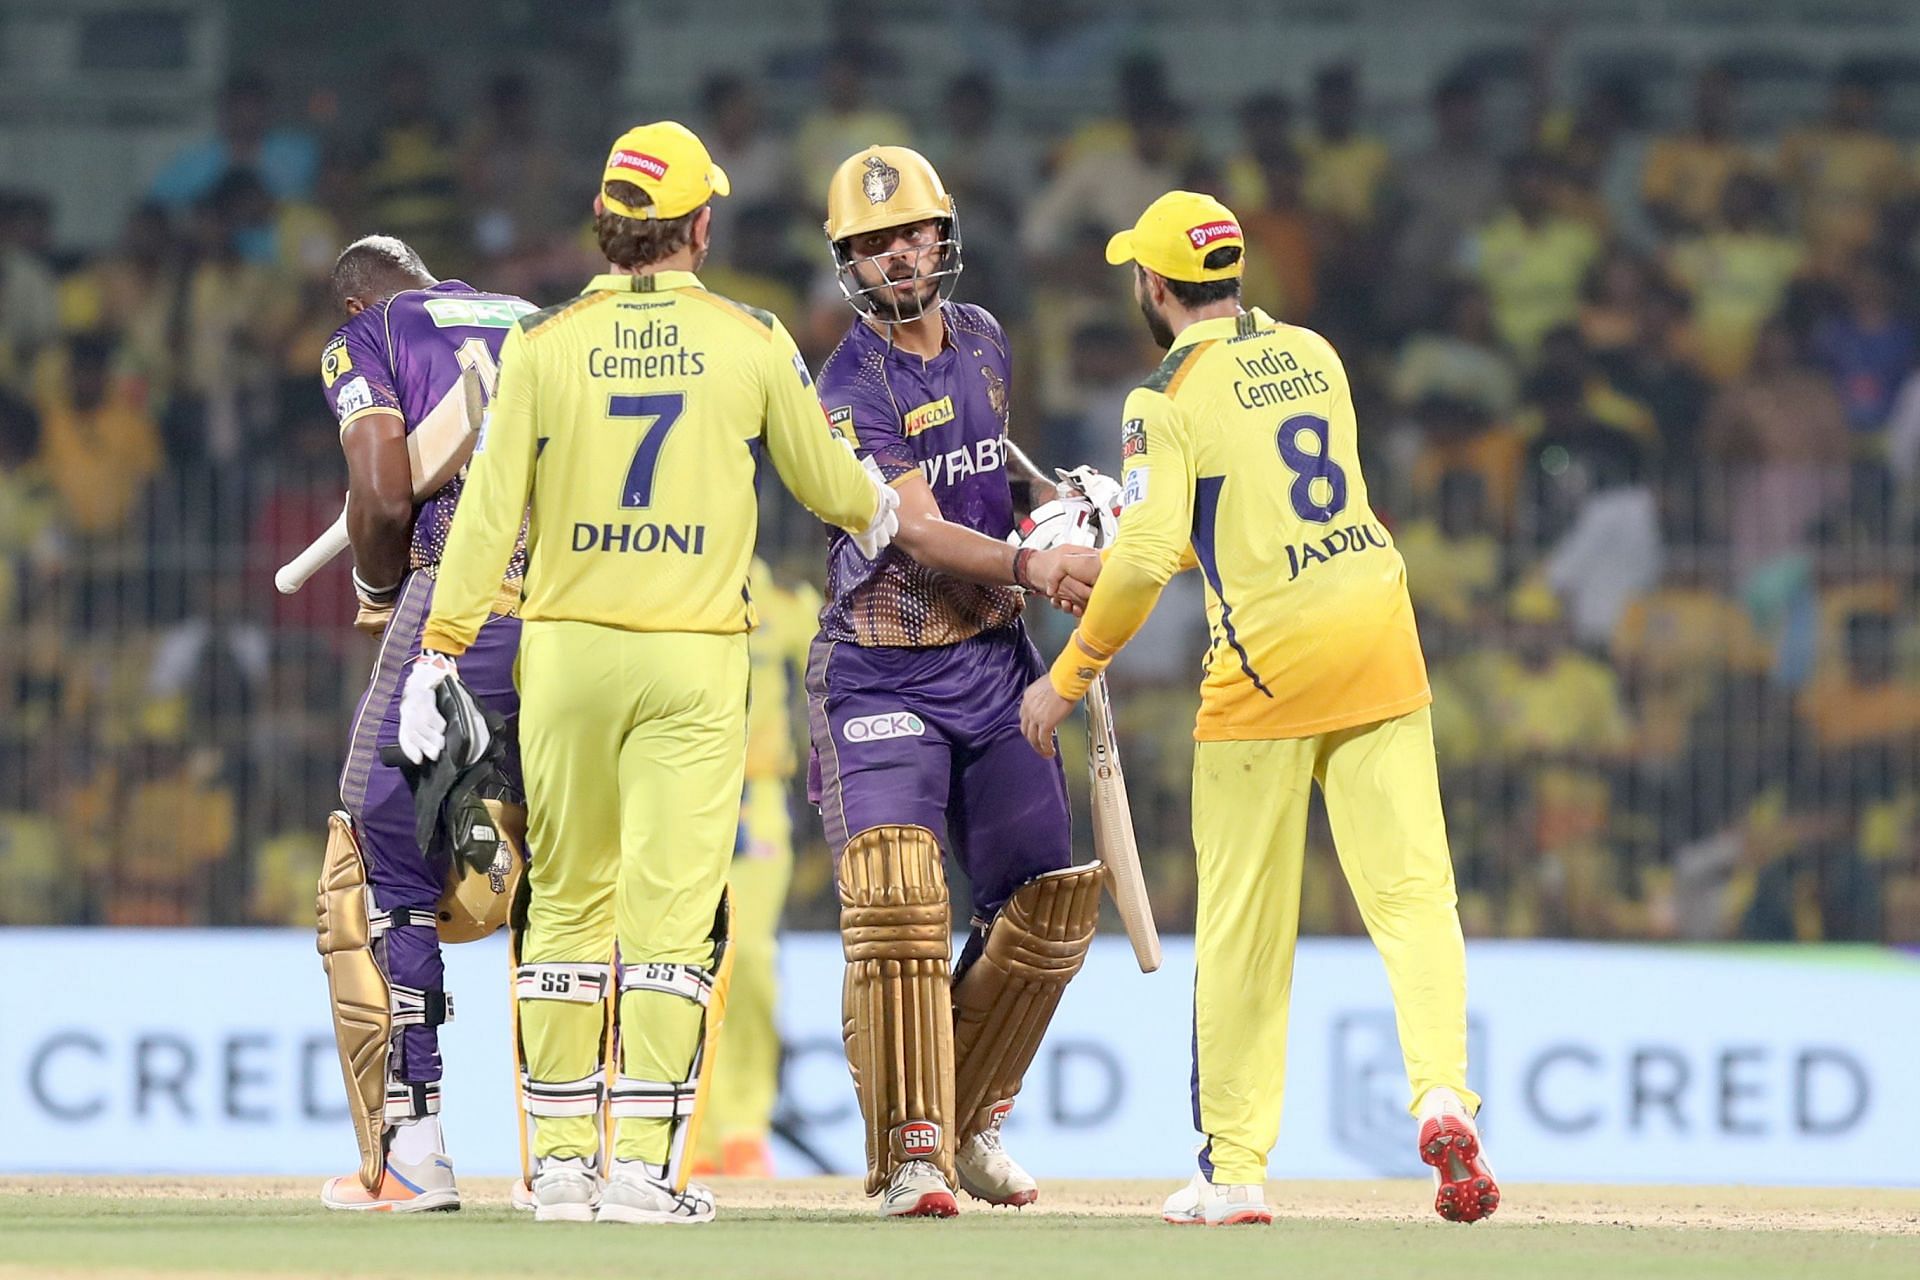 CSK still have a good chance of qualifying [Image: IPL]